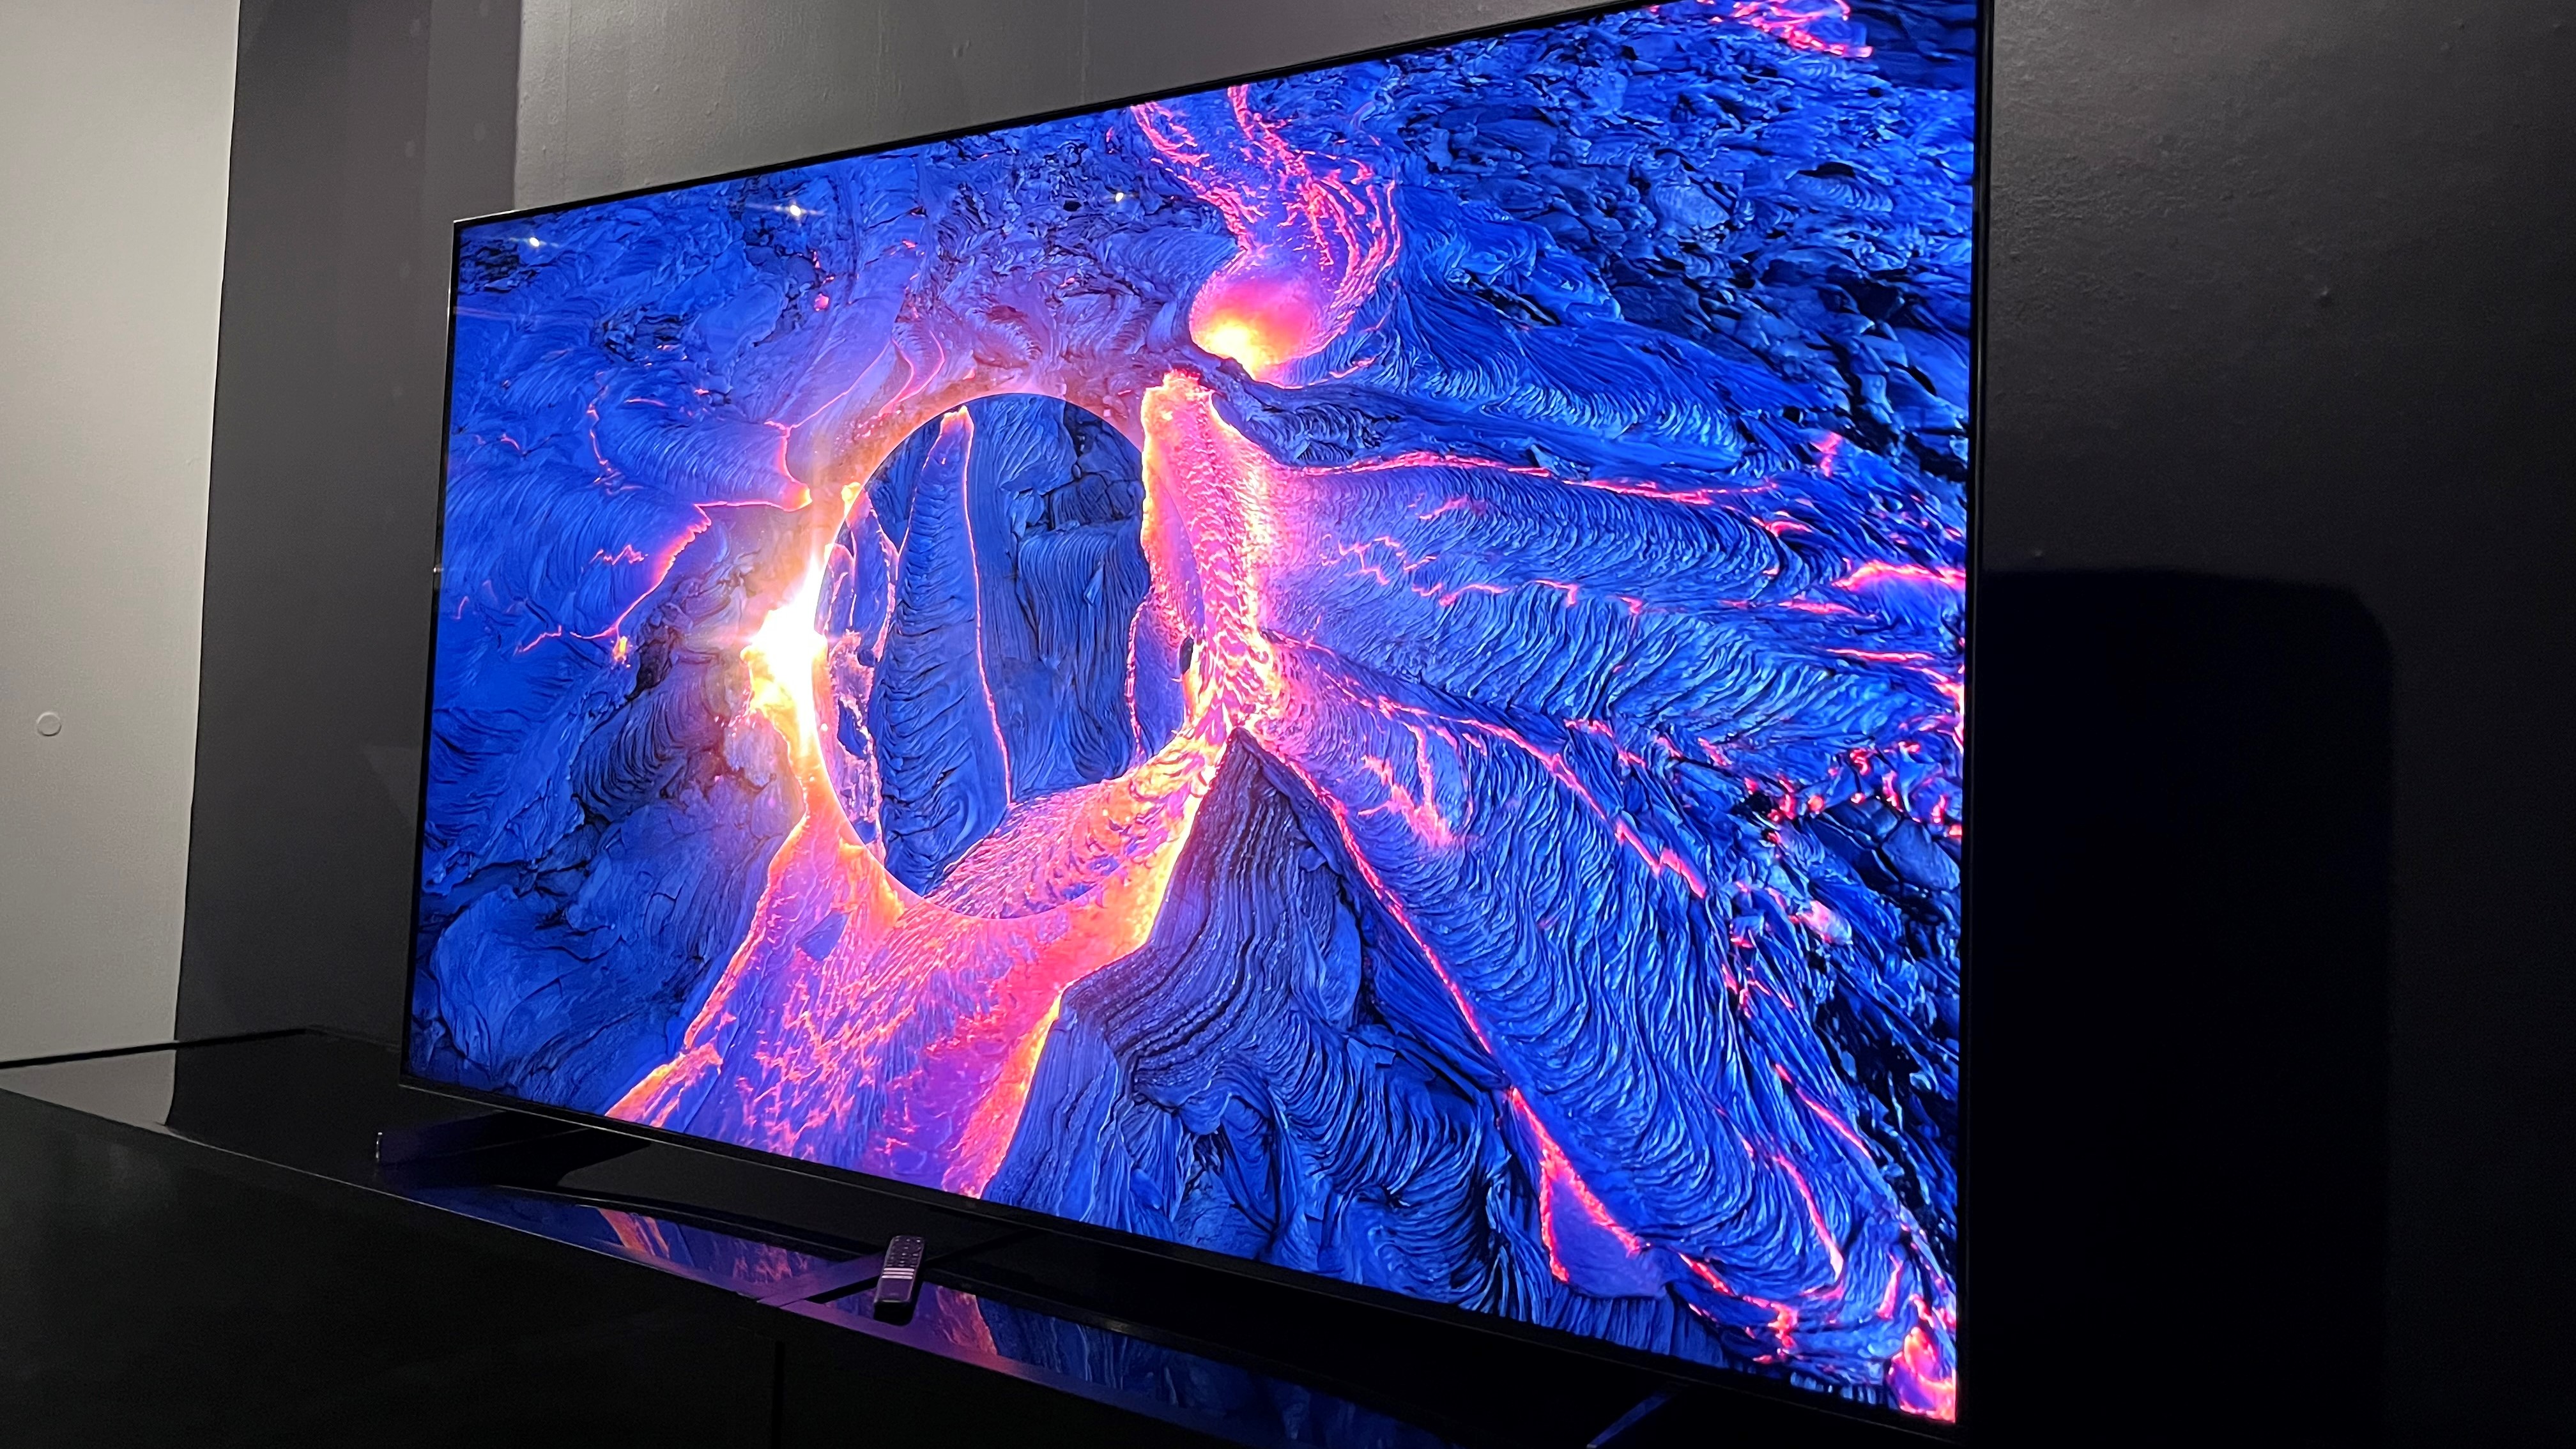 TCL QM8 Series TV showing abstract image